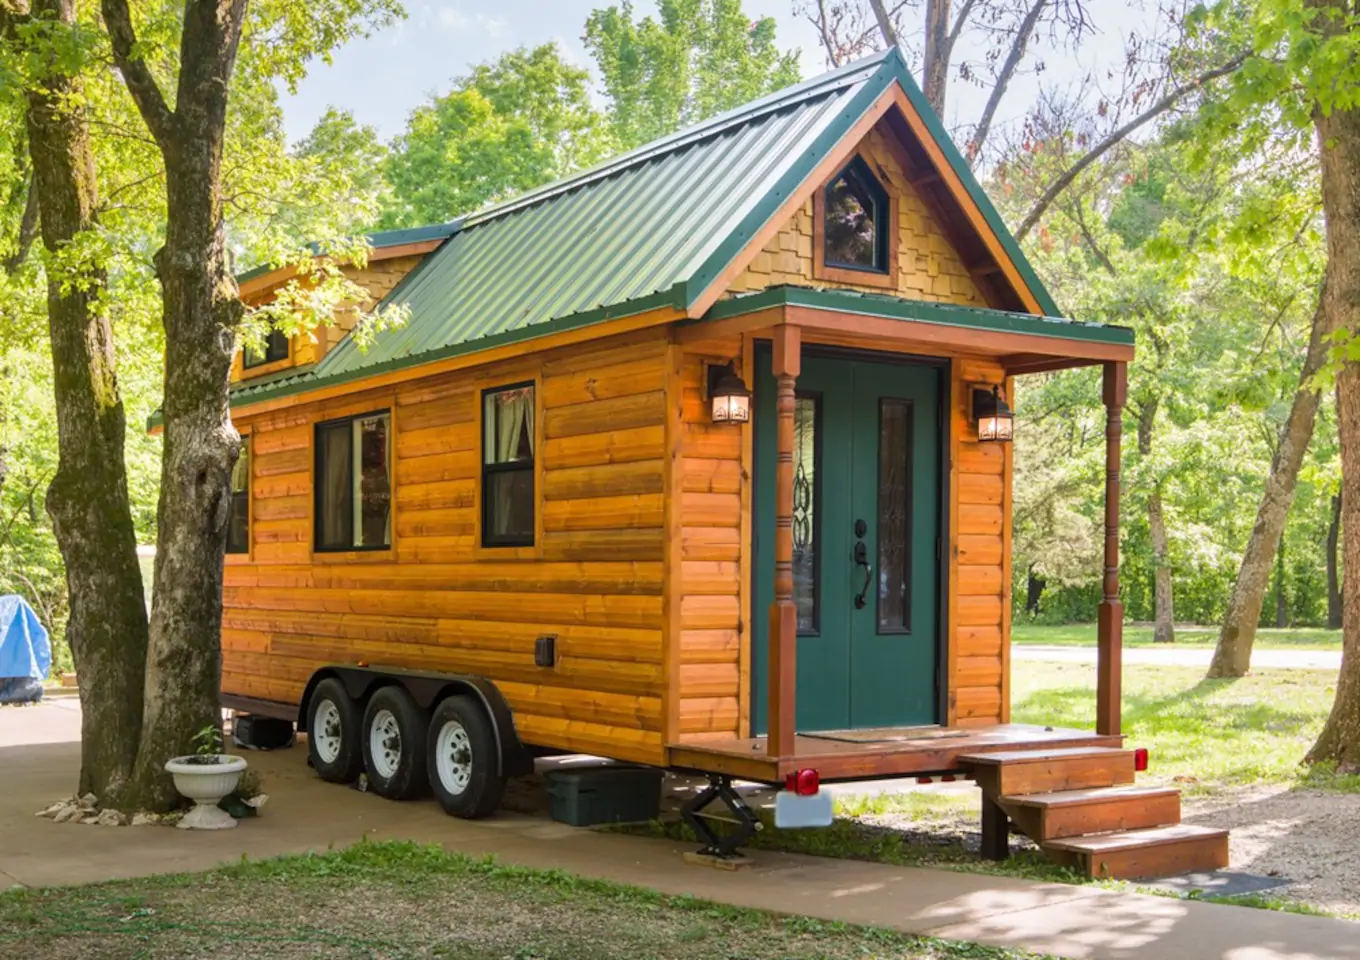 A small tiny house made of wood with a green double door. Stairs lead up to the home, which is on wheels and is surrounded by a plush forest.